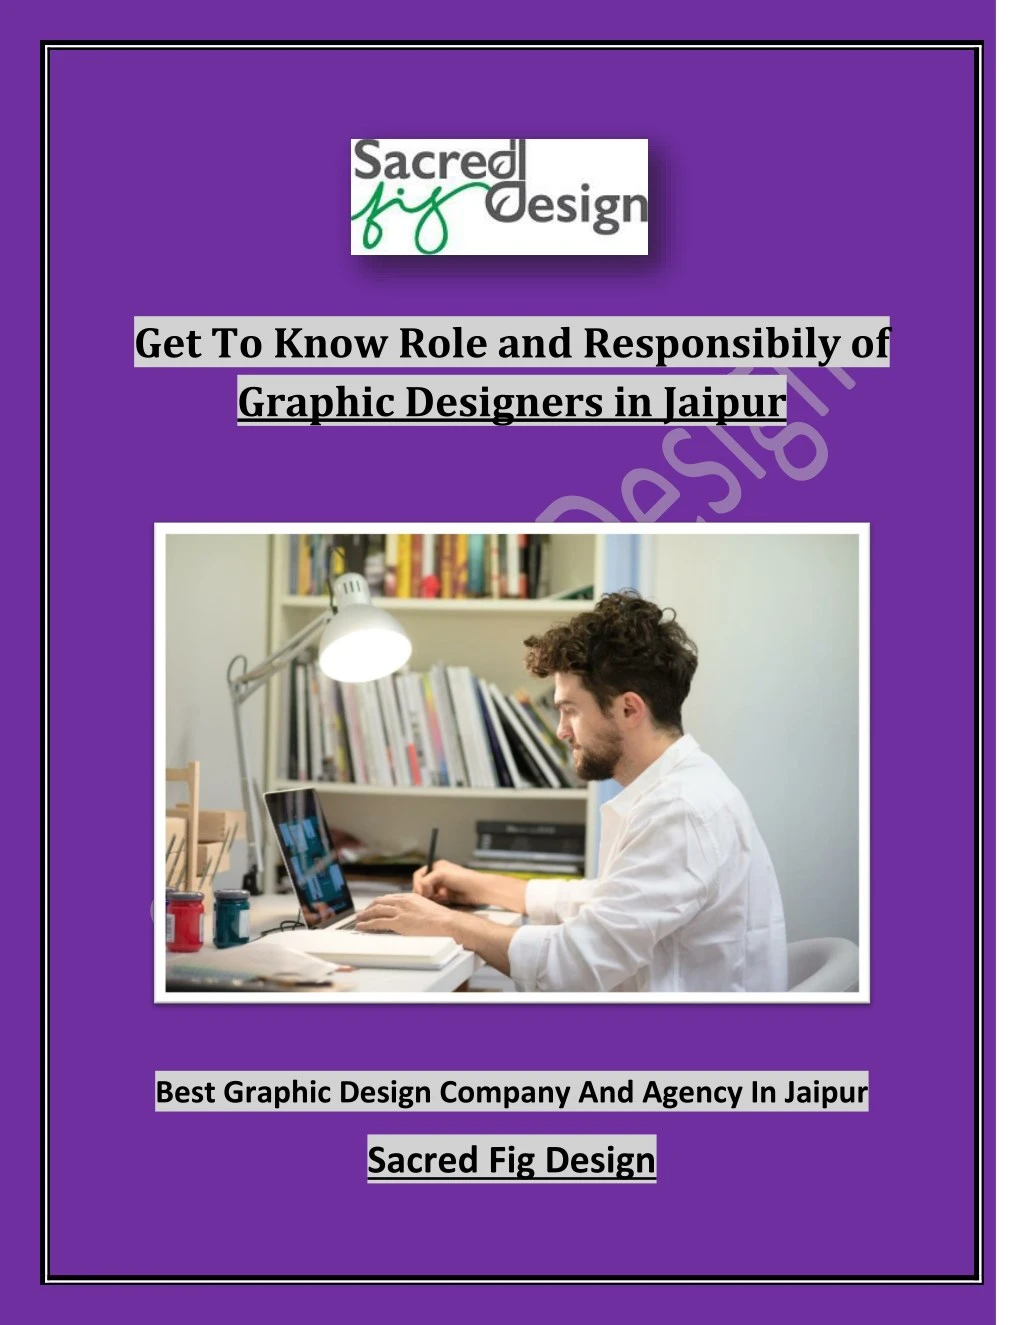 get to know role and responsibily of graphic